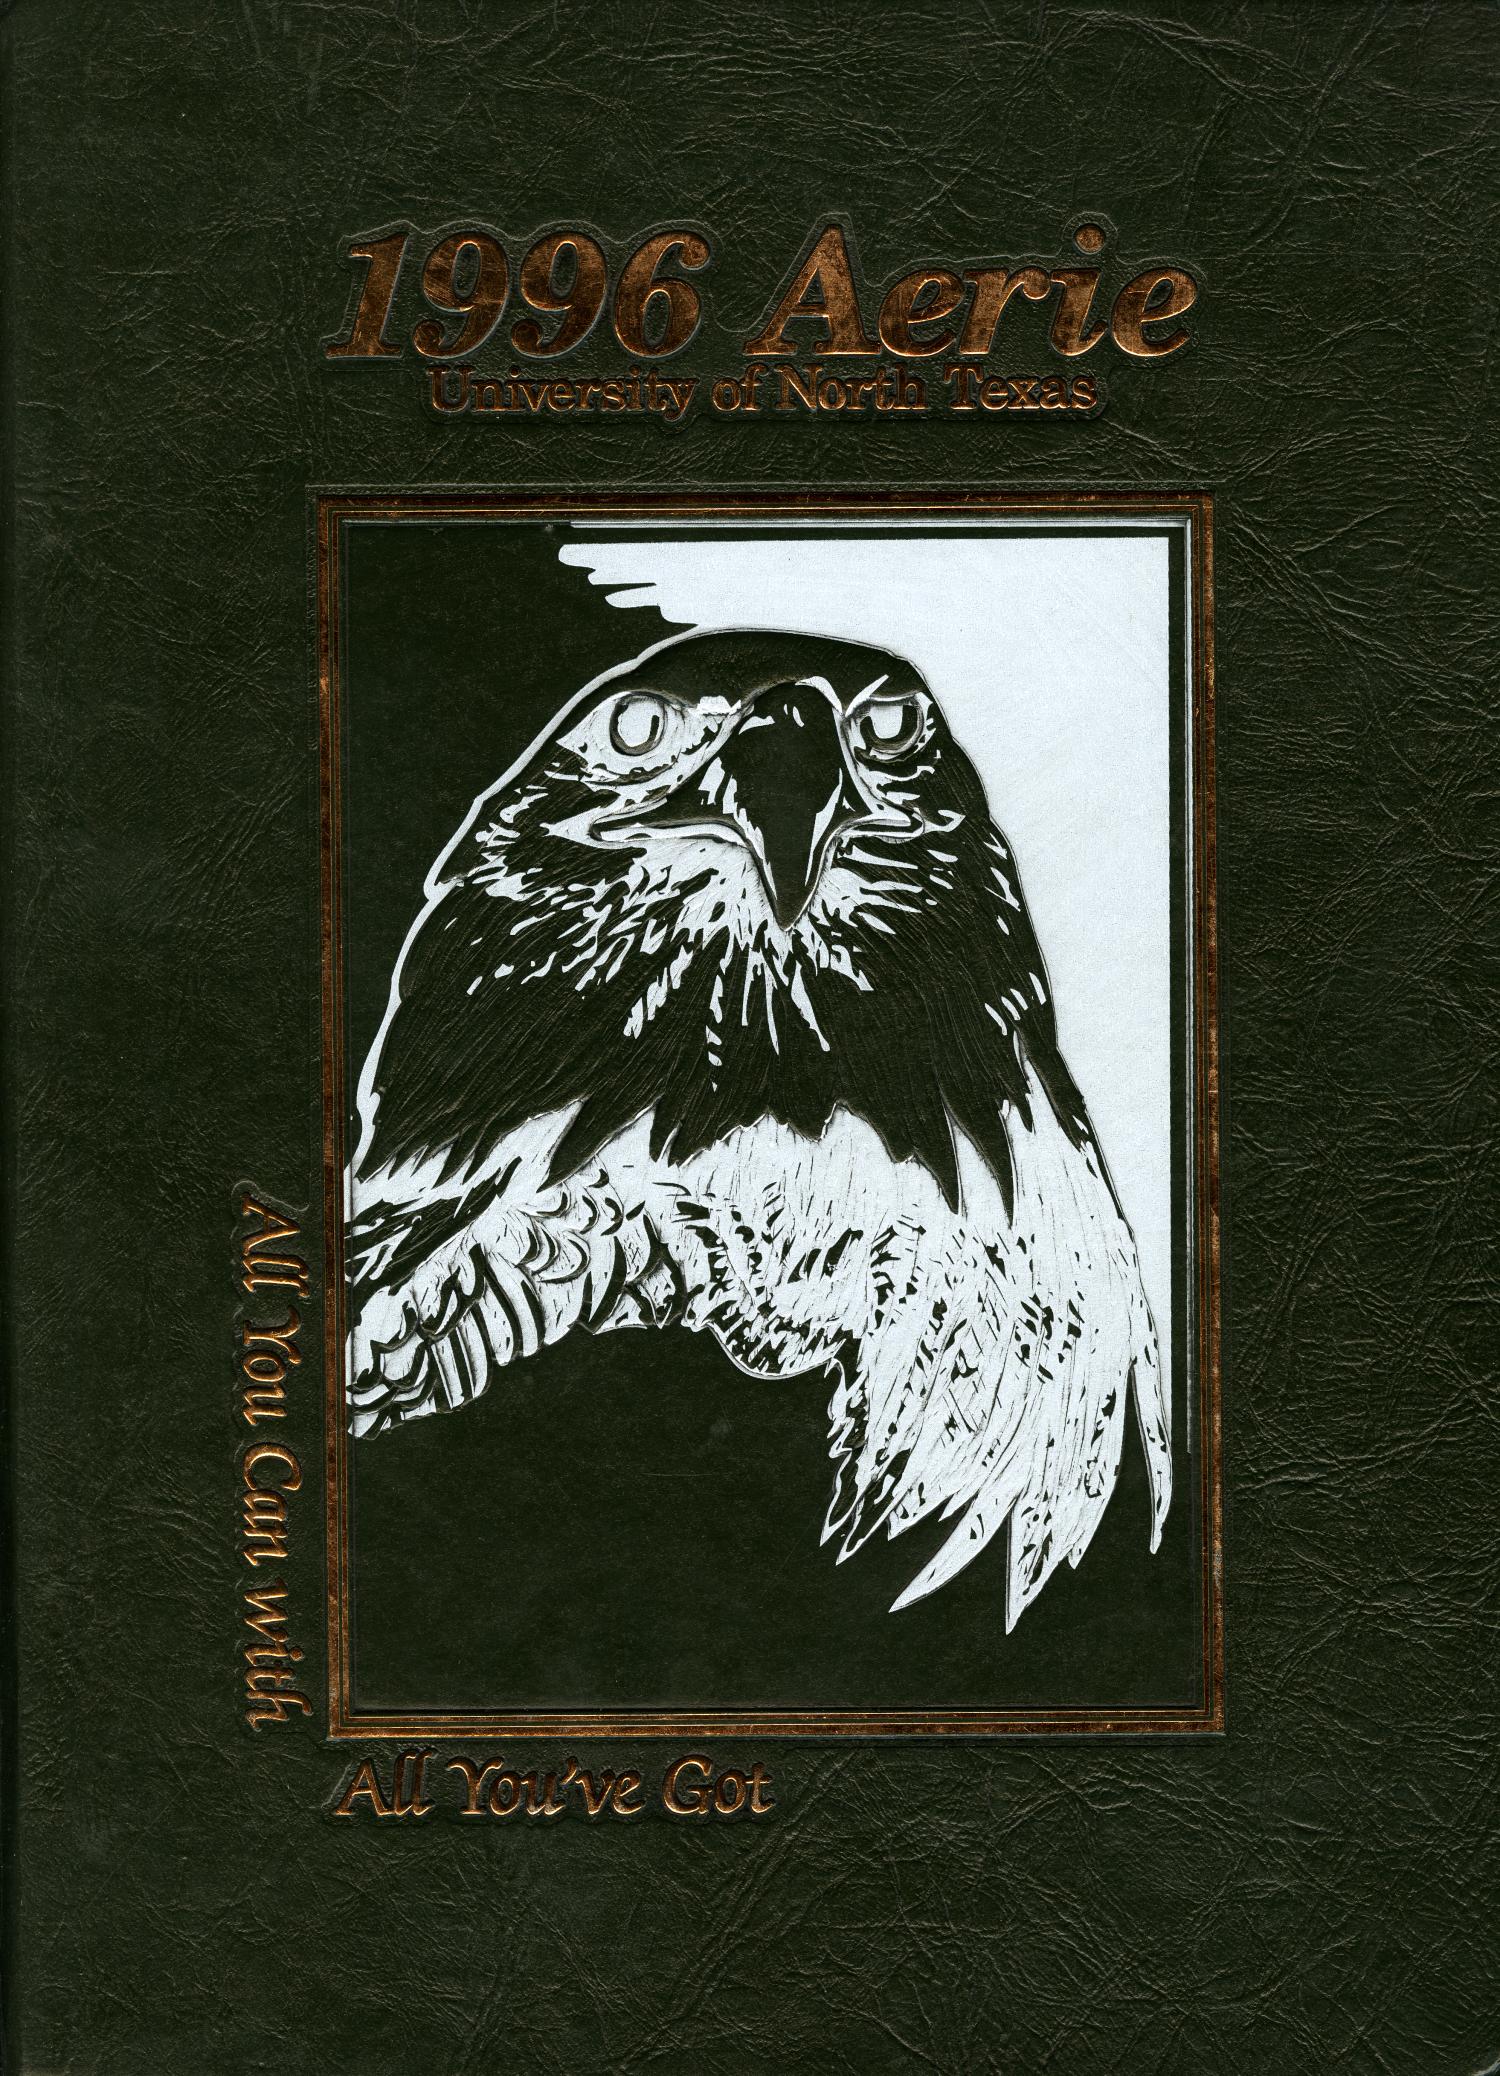 The Aerie, Yearbook of University of North Texas, 1996
                                                
                                                    Front Cover
                                                